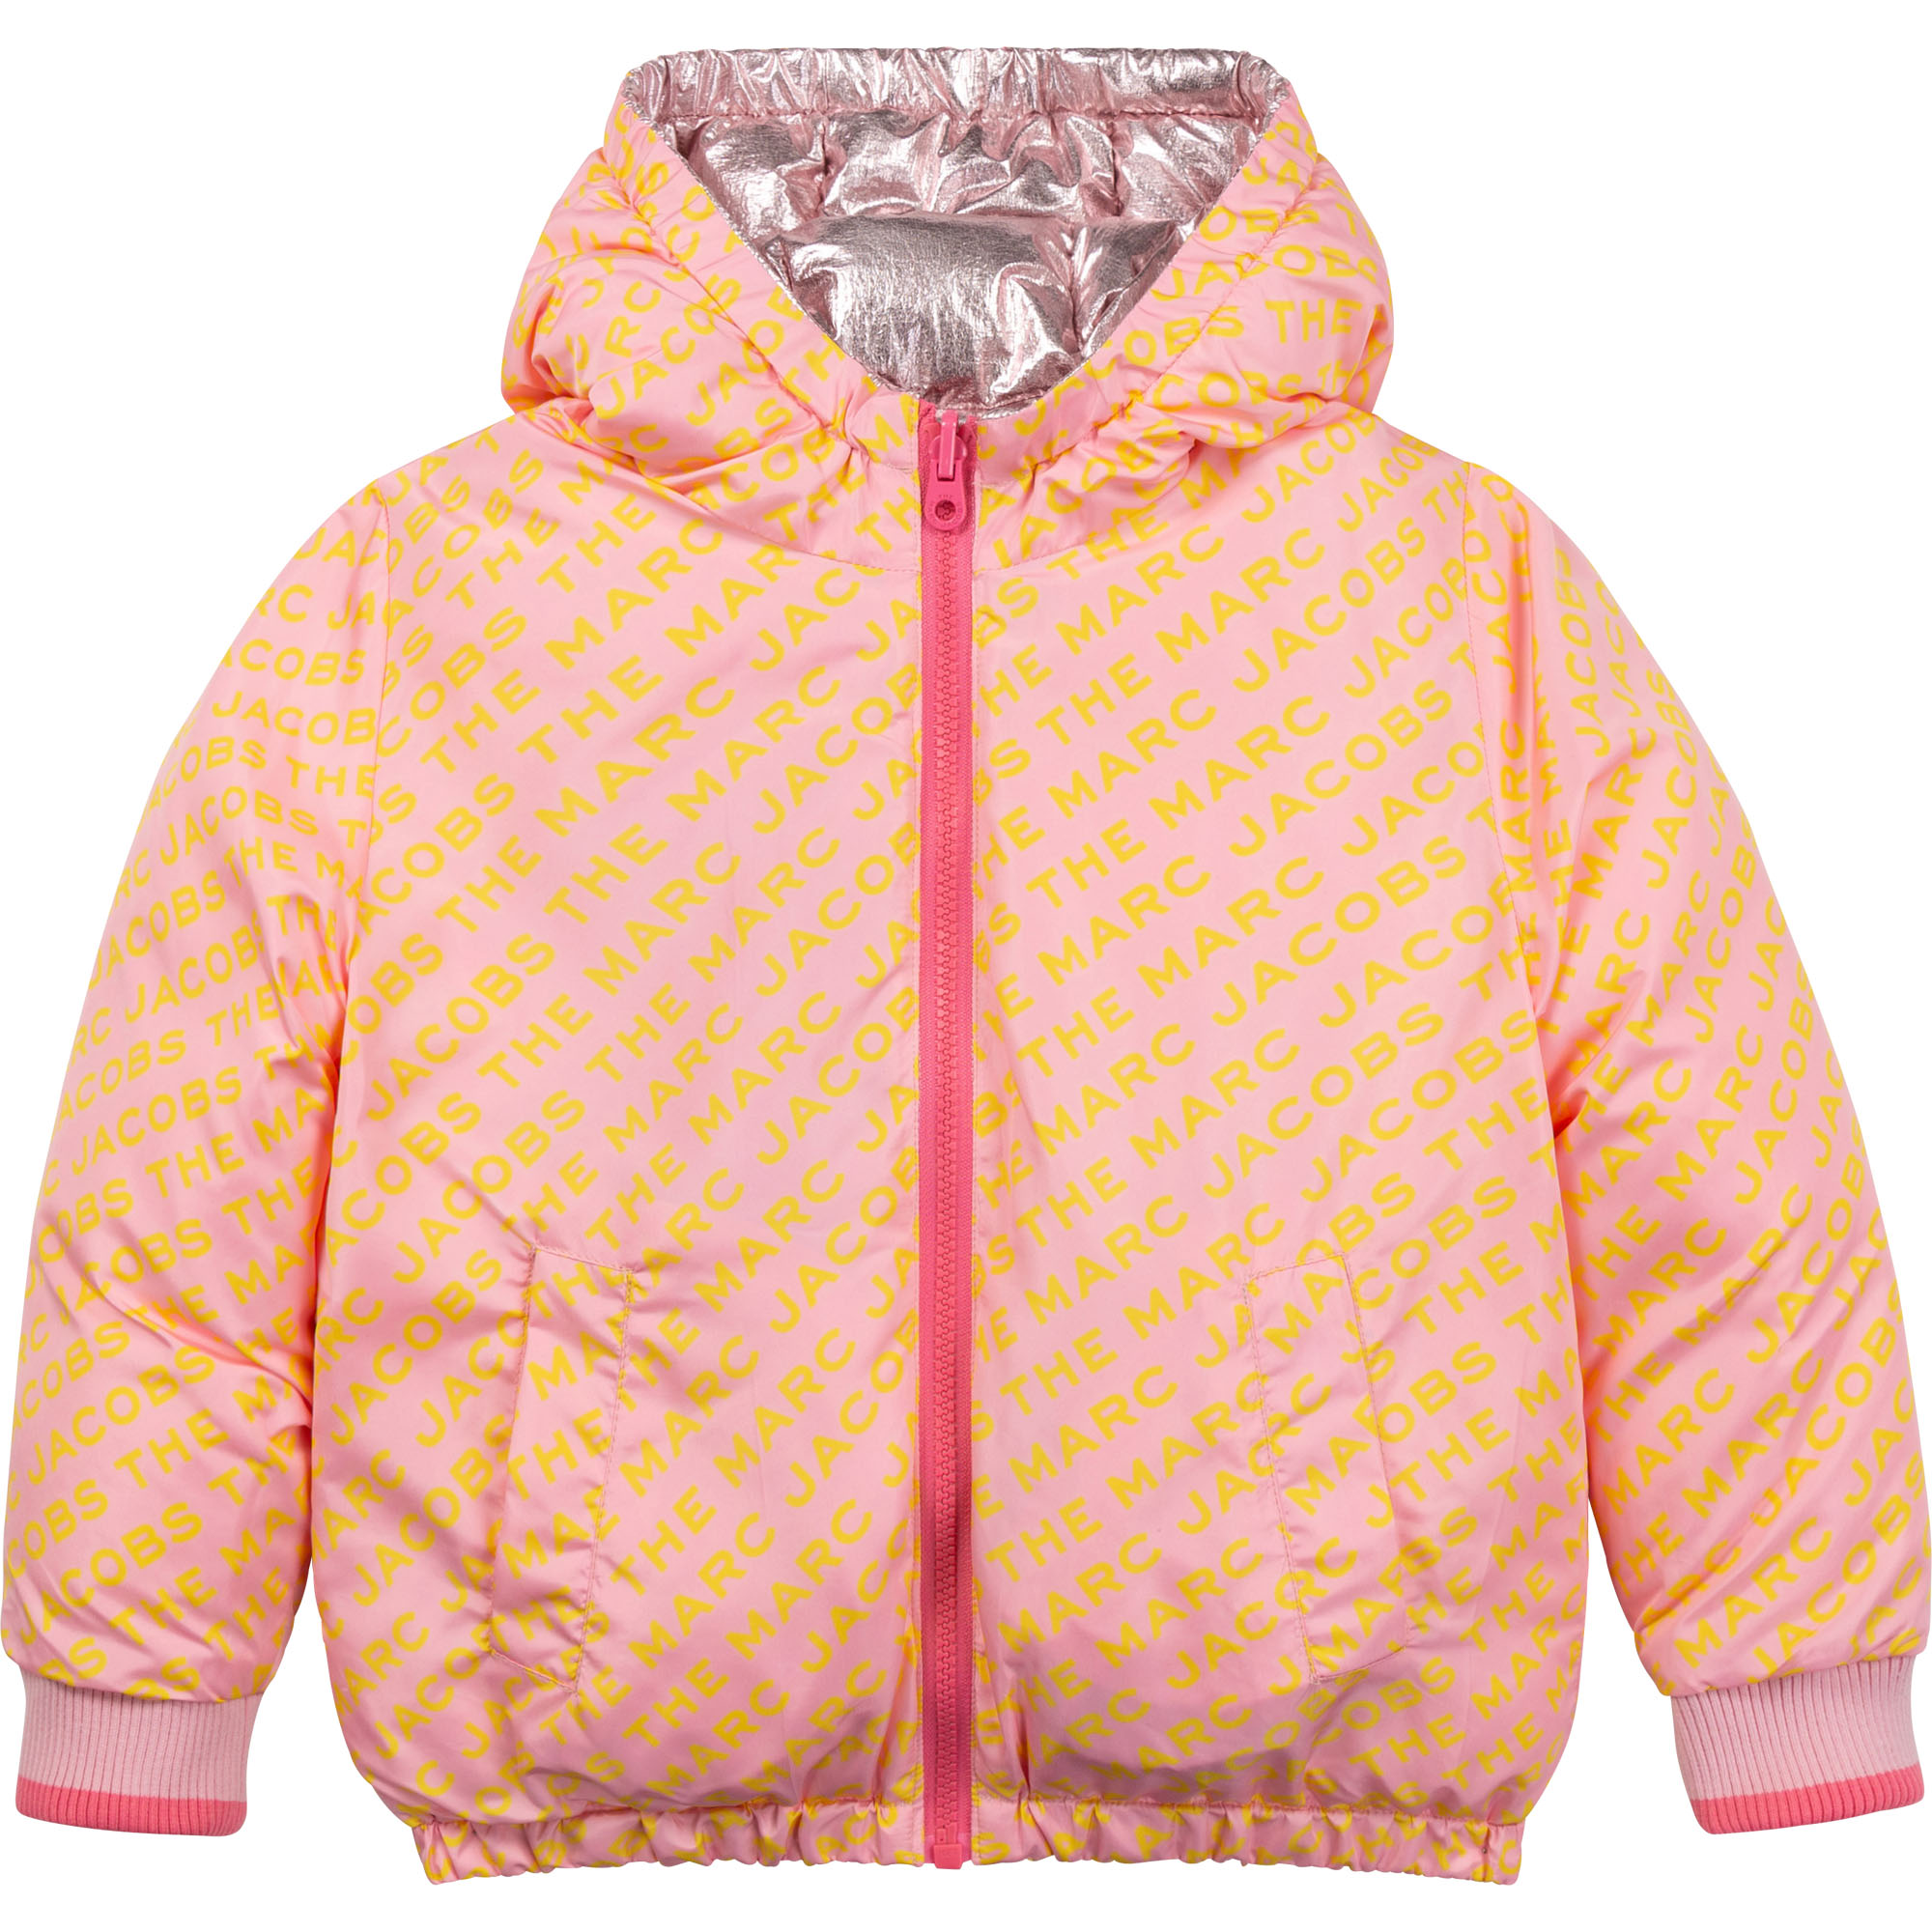 Reversible hooded puffer jacket THE MARC JACOBS for GIRL